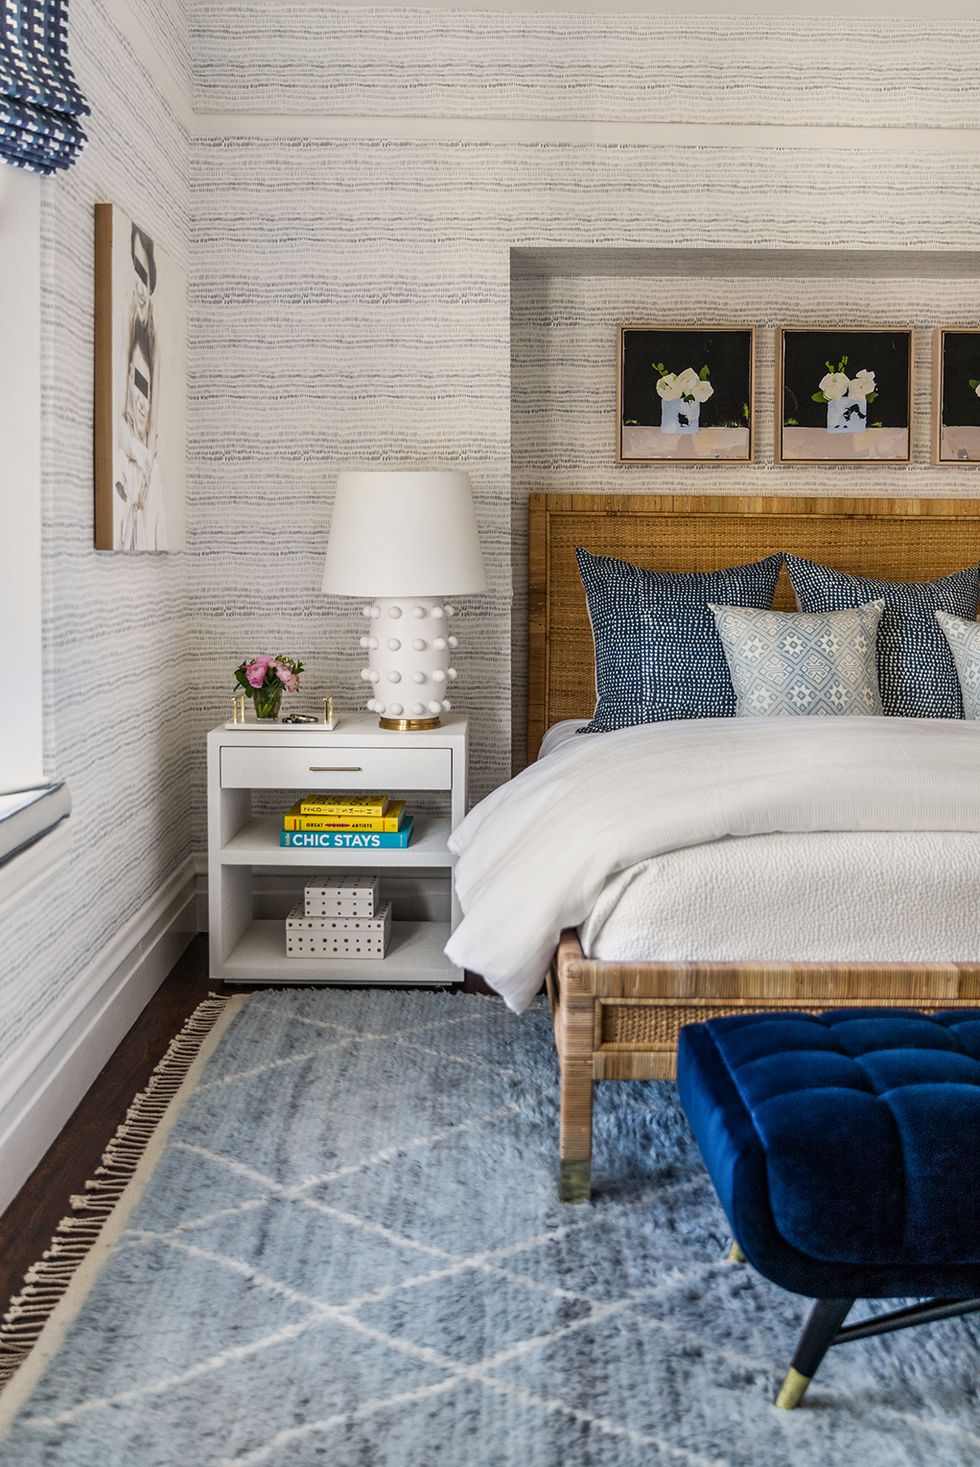 8 Clever Ways to Level Up the Design of Your Bedroom